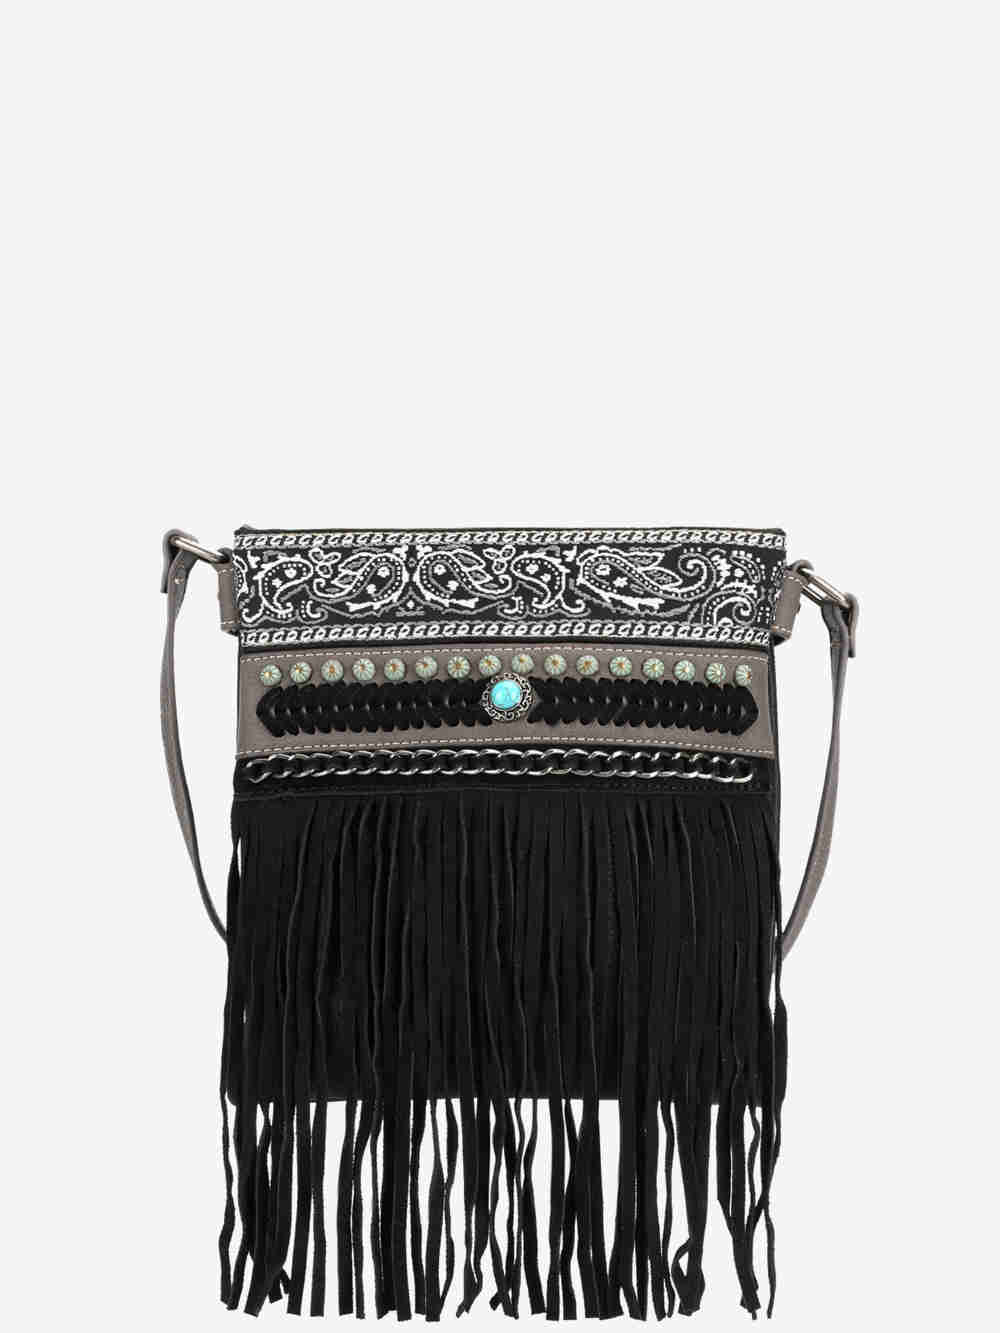 Montana West Embroidered Fringe Concealed Carry Crossbody - Montana West World